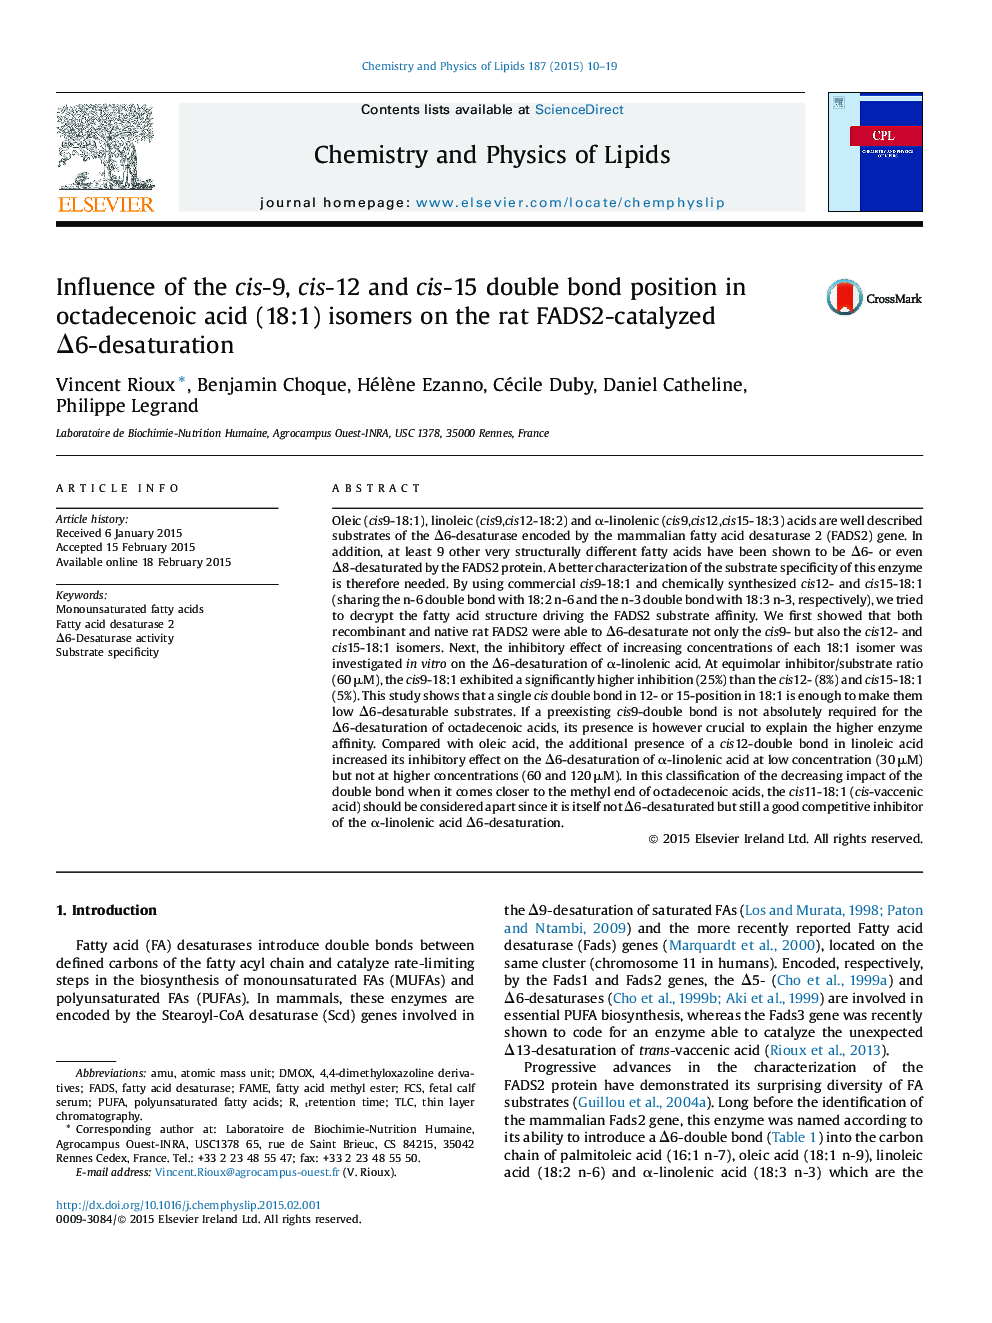 Influence of the cis-9, cis-12 and cis-15 double bond position in octadecenoic acid (18:1) isomers on the rat FADS2-catalyzed Δ6-desaturation